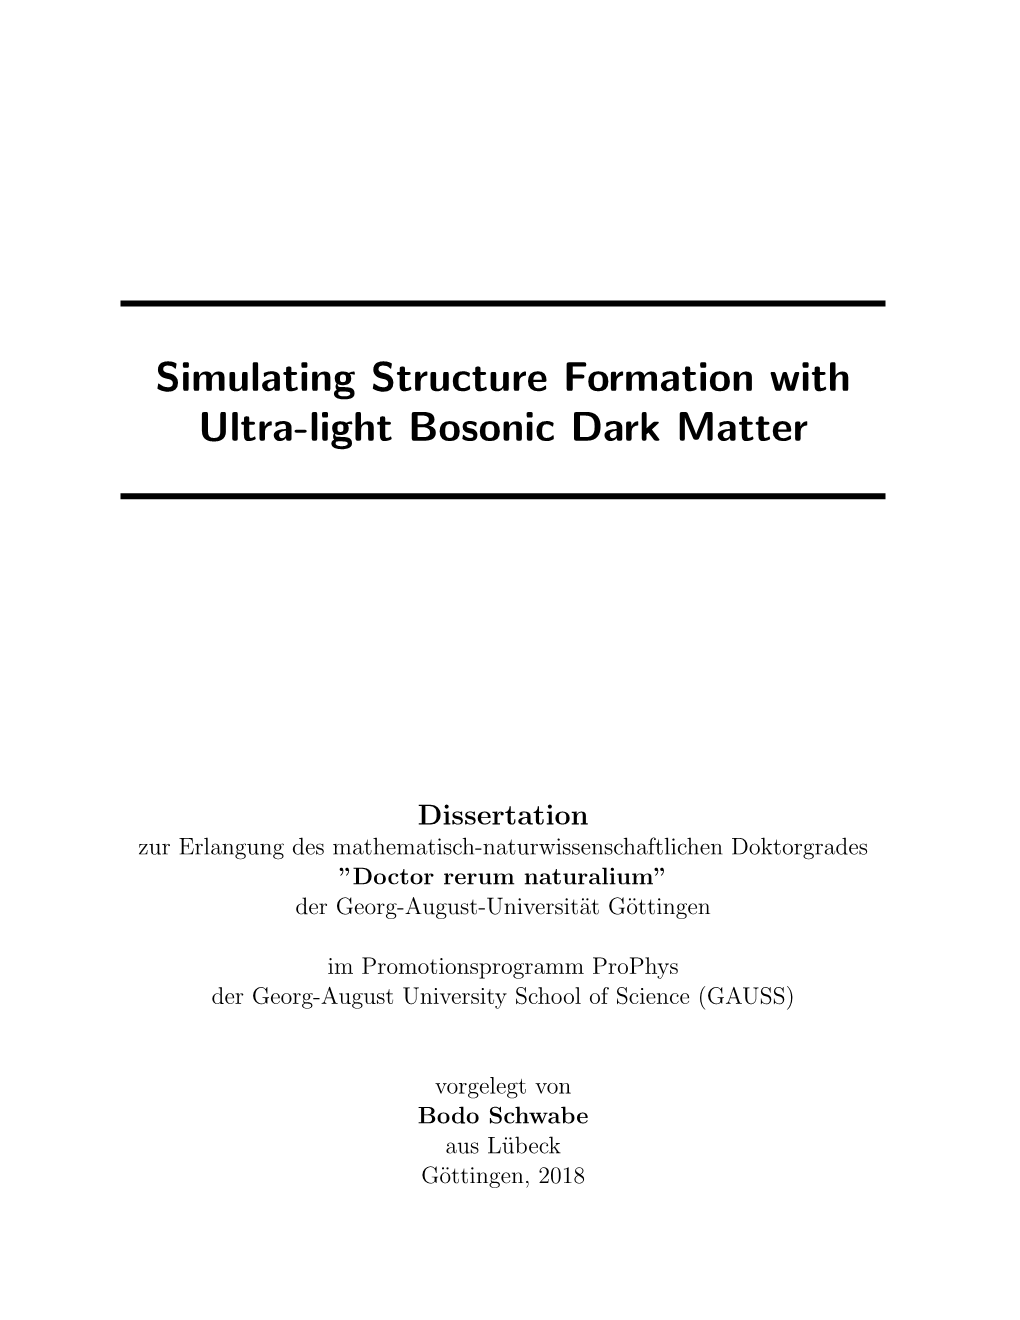 Simulating Structure Formation with Ultra-Light Bosonic Dark Matter